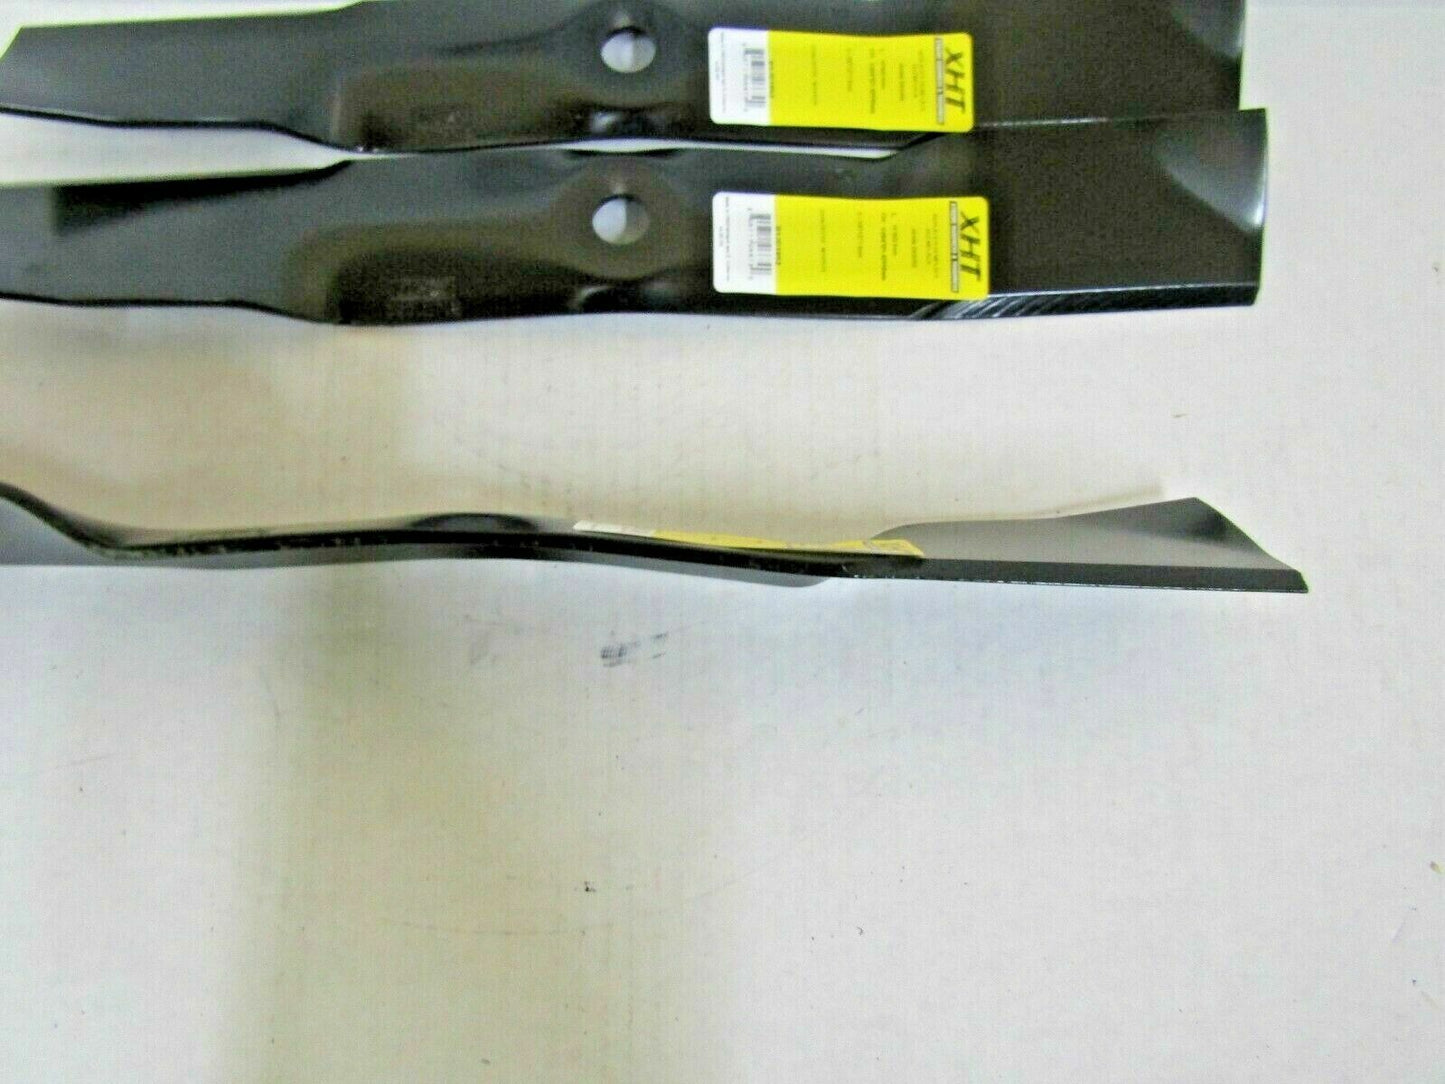 3 USA blades will fit JOHN DEERE UC22010 54" C DECKS REPLACES FITS SEVERAL